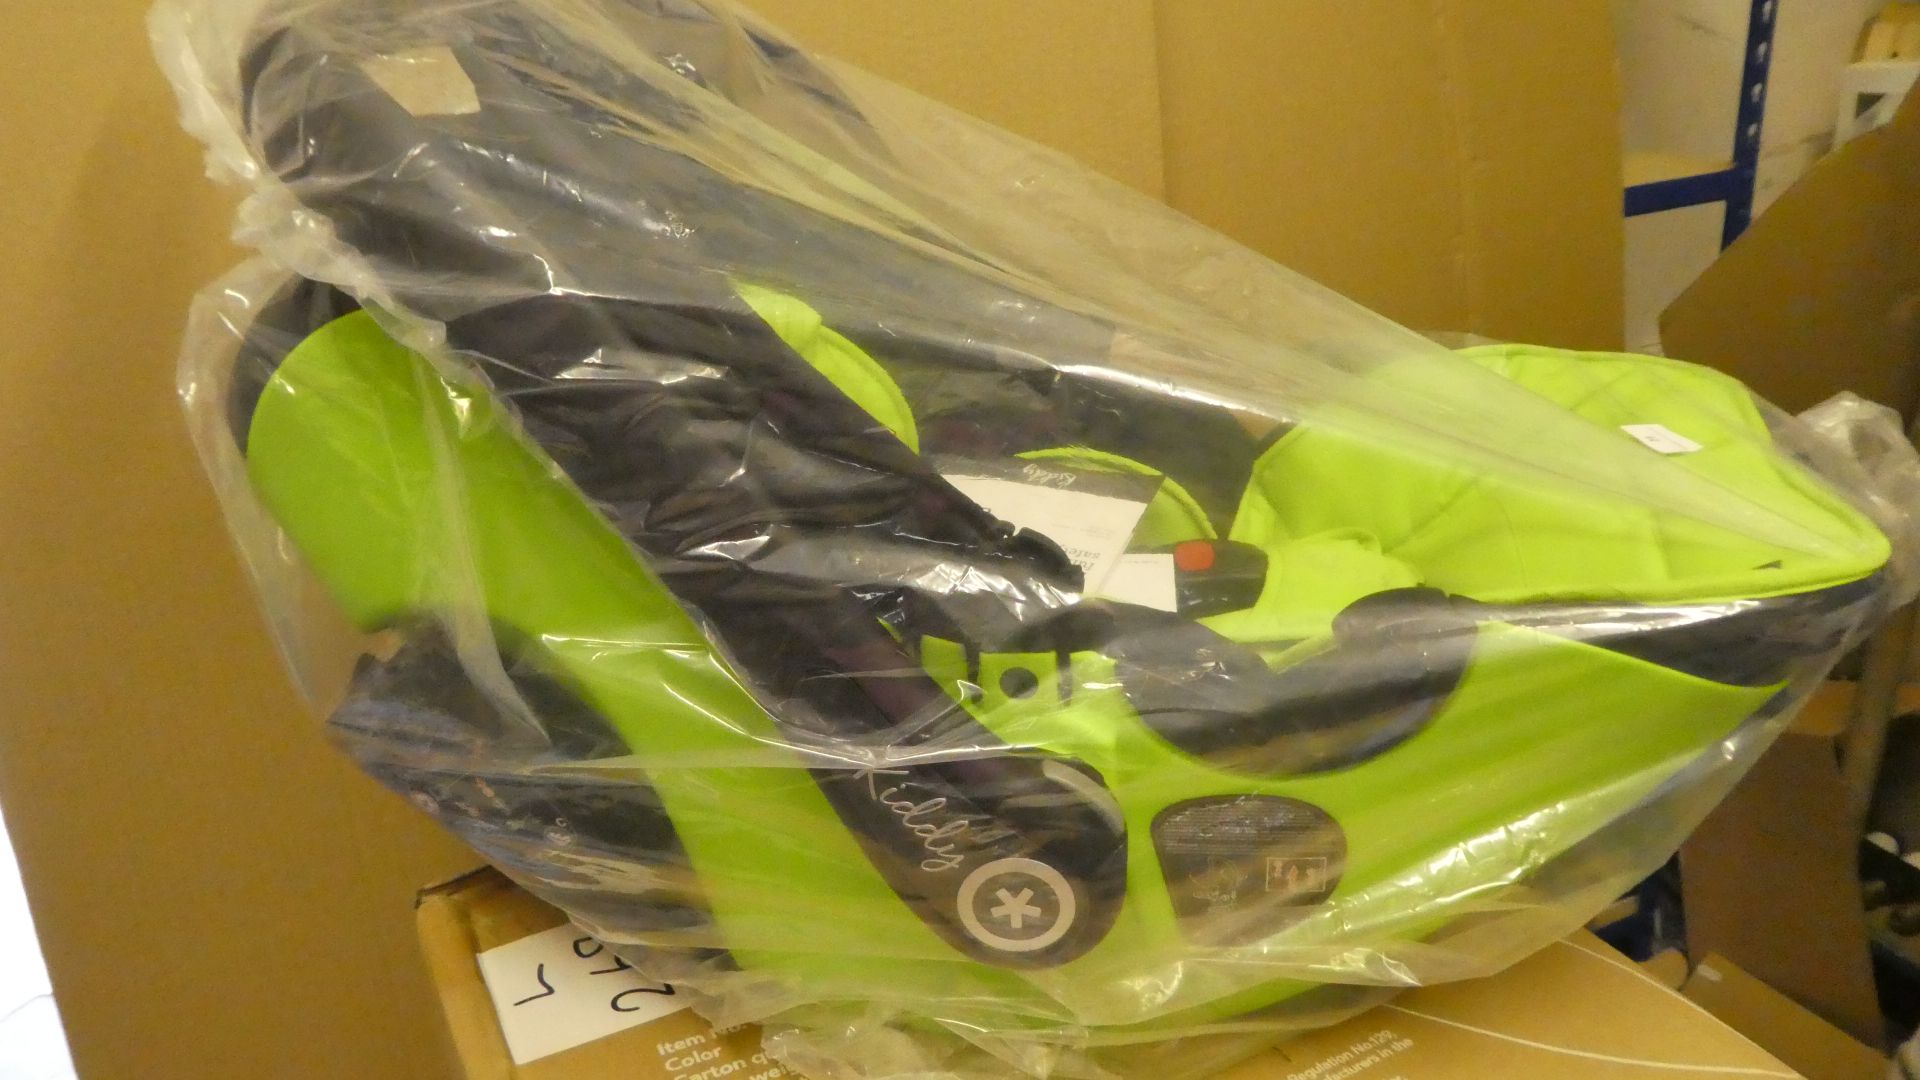 *Kiddy Evolution PRO 2 Childs Car Seat Group 0+ Spring green.New - Image 4 of 4